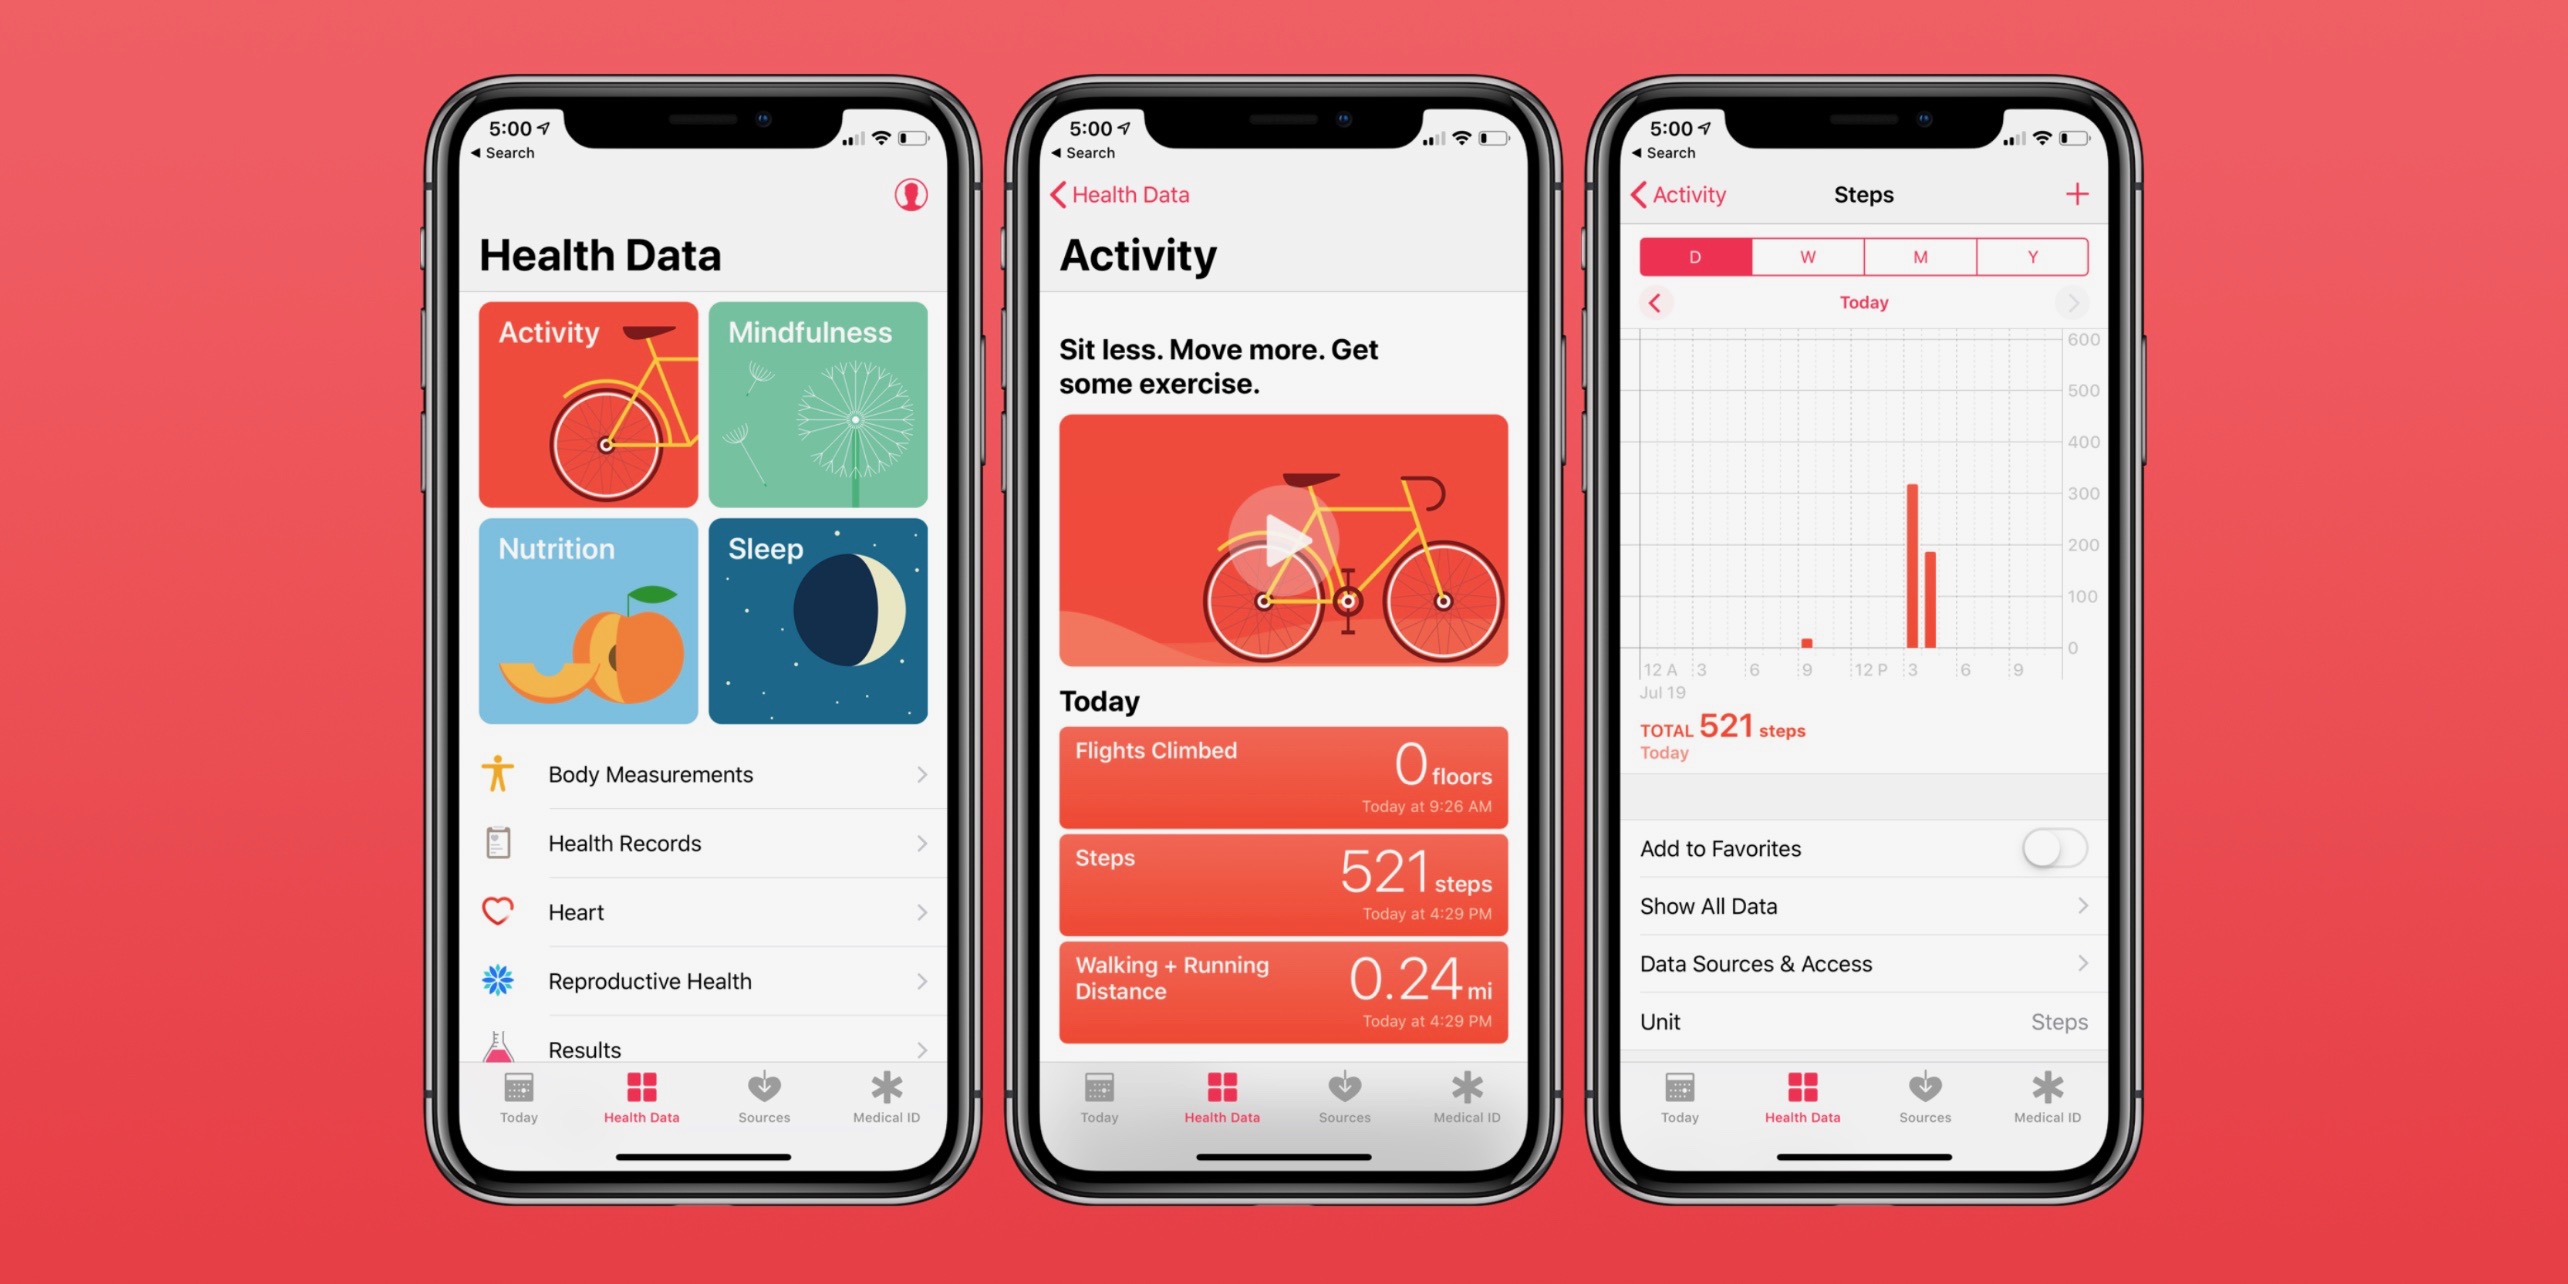 https://9to5mac.com/wp-content/uploads/sites/6/2019/07/prioritize-apple-health-data-iphone.jpeg?quality=82&strip=all